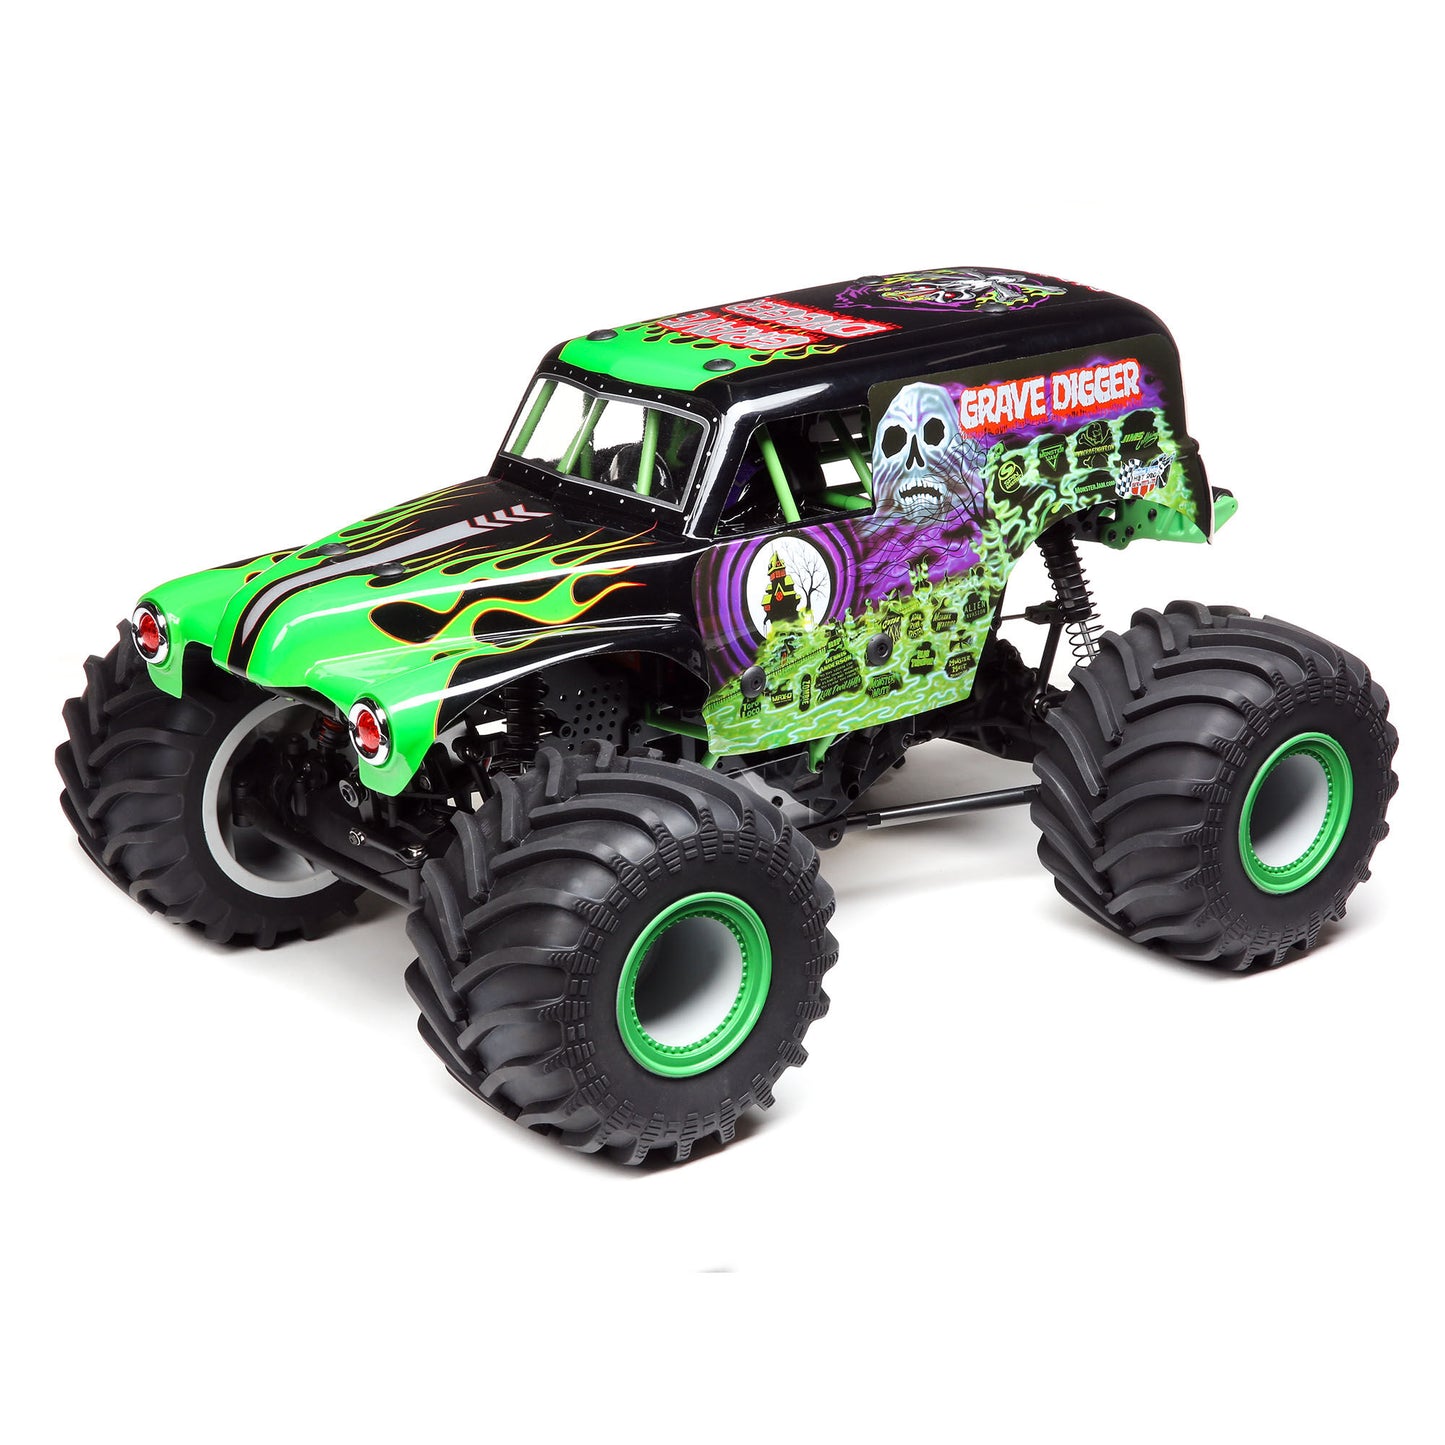 LMT 4X4 Solid Axle Monster Truck RTR  Grave Digger